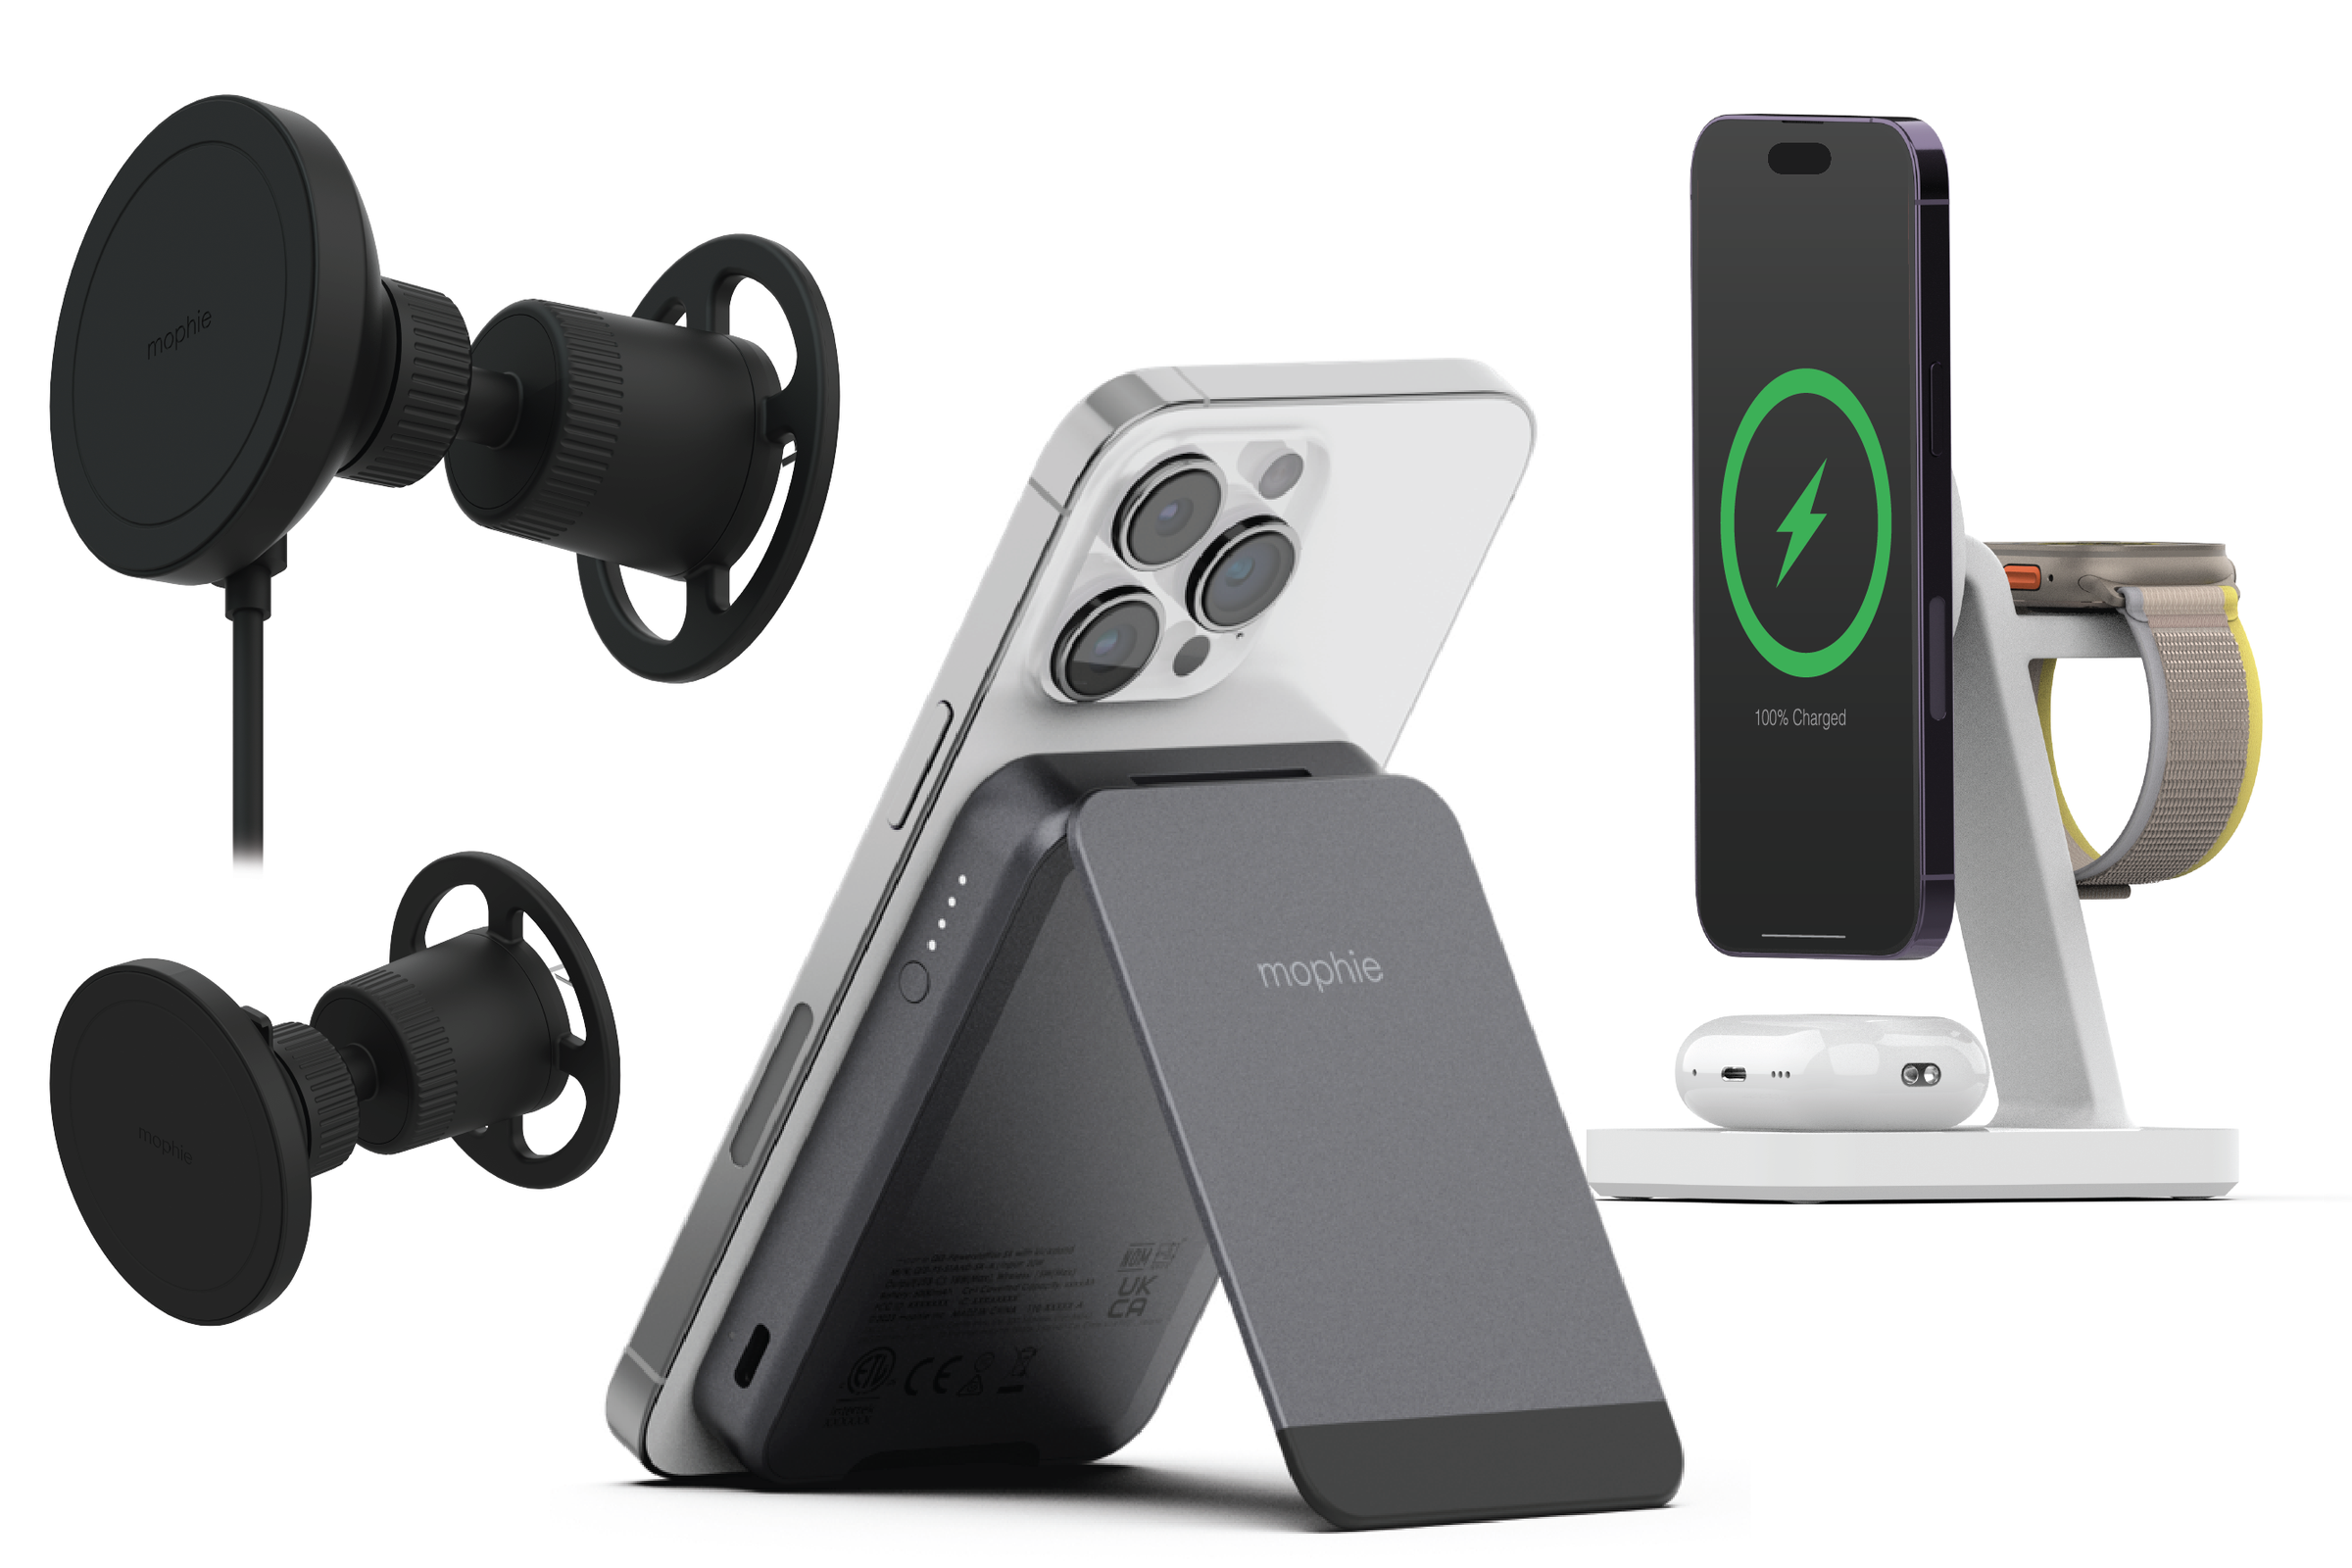 A collage of Mophie’s new Wireless charging stands and mounts, with the new Snap Plus Powerstation Mini stand in the center, the 3-in-1 stand on the right, and the two magnetic vent mounts on the left.